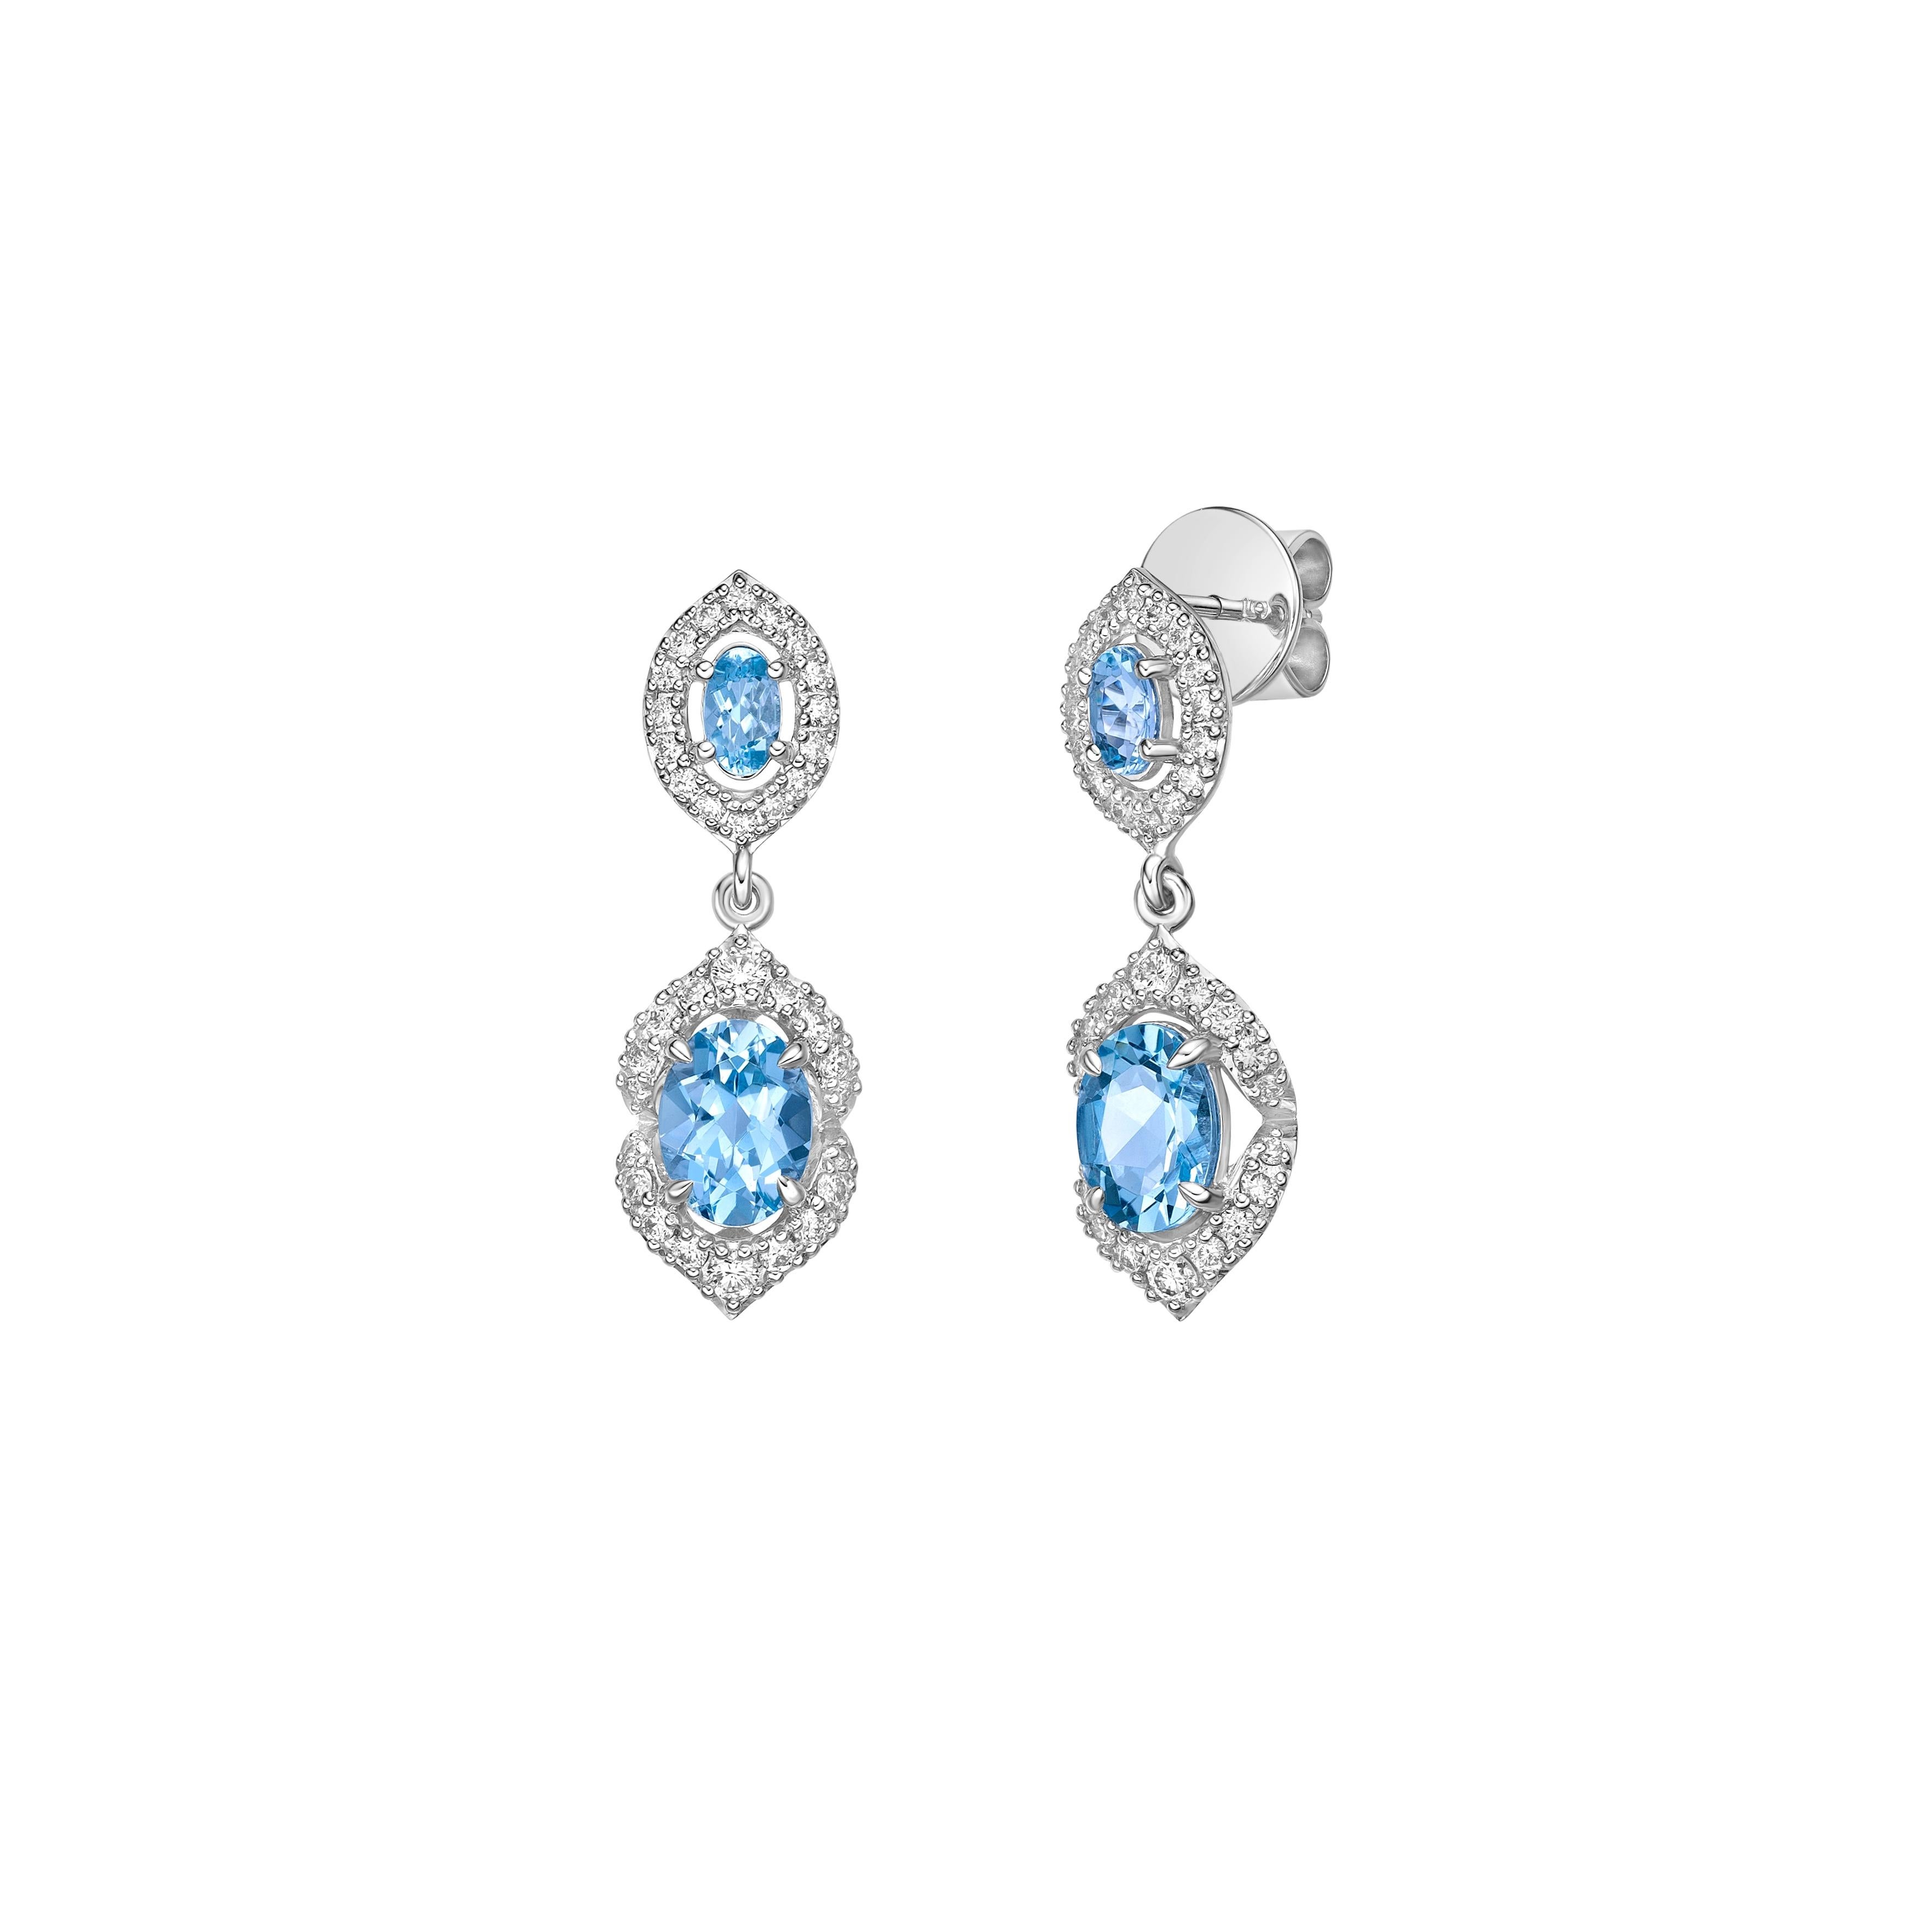 Oval Cut 2.29 Carat Aquamarine Drop Earrings in 18Karat White Gold with White Diamond. For Sale